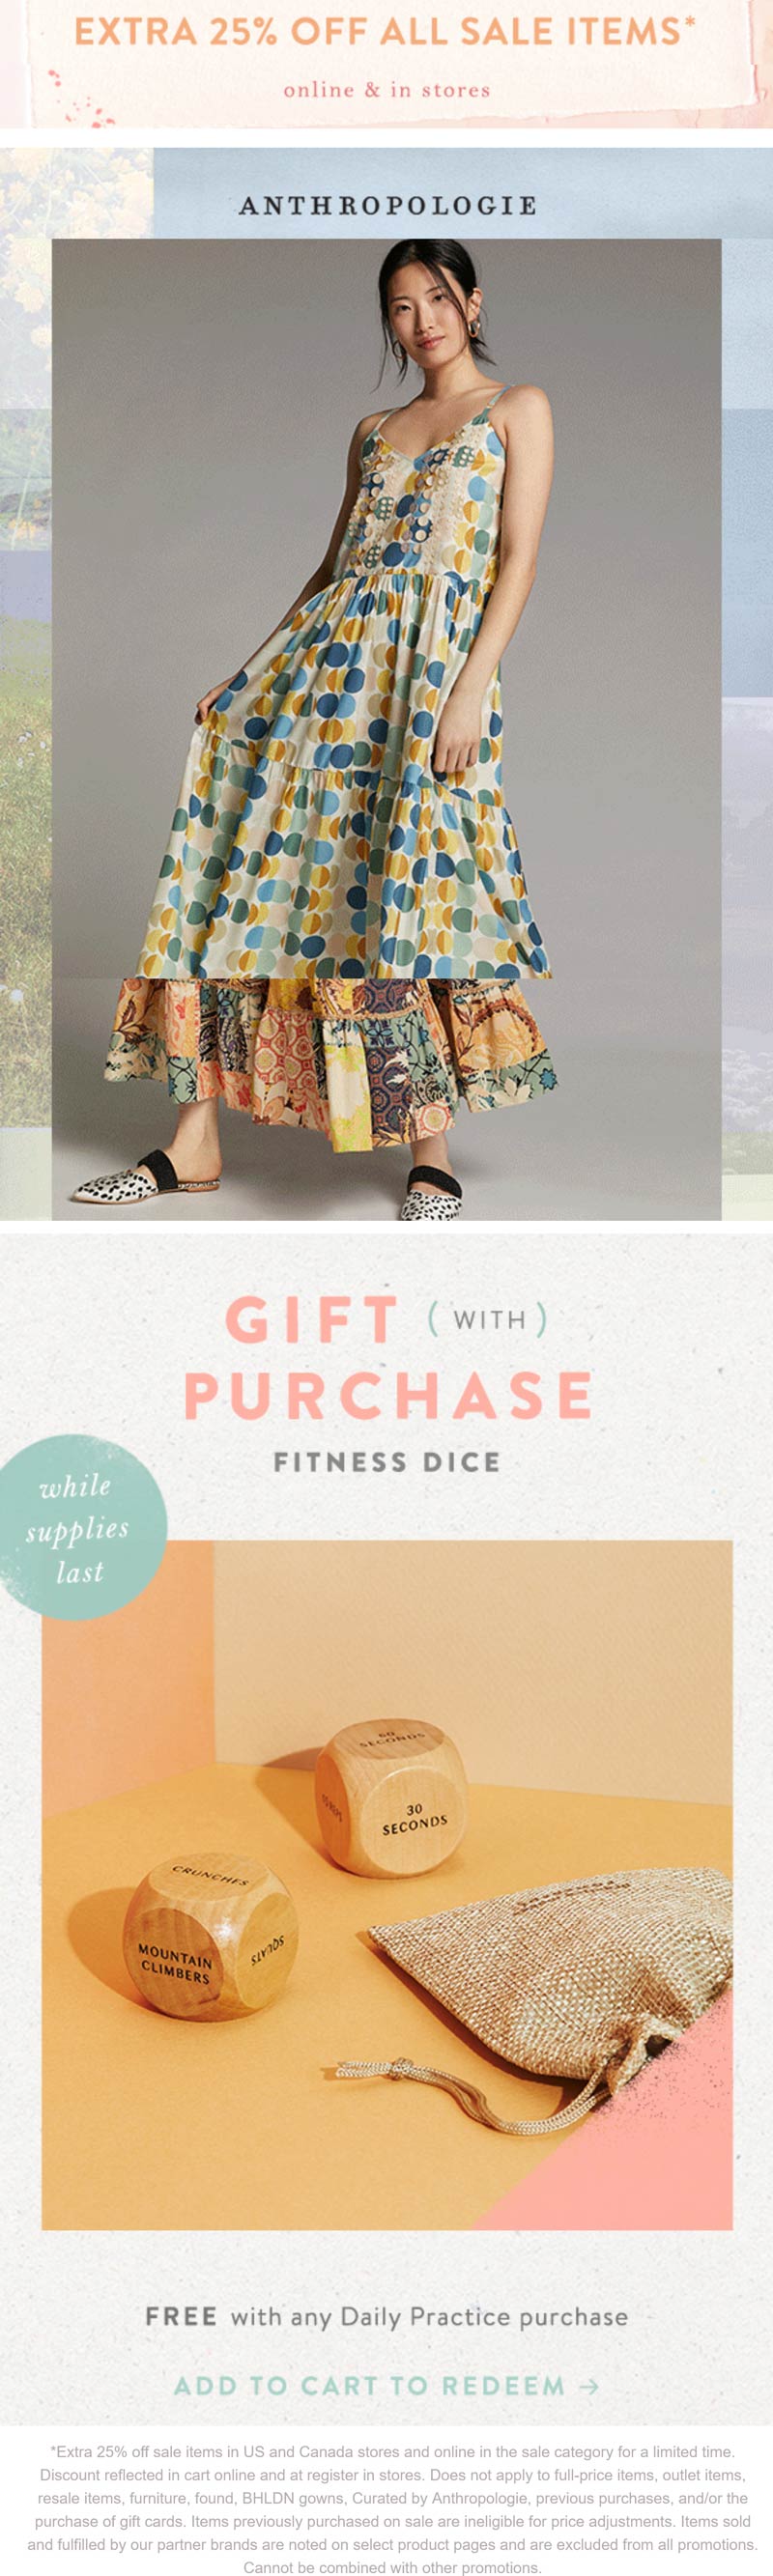 Anthropologie stores Coupon  Extra 25% off sale items + free fitness dice at Anthropologie, ditto online #anthropologie 